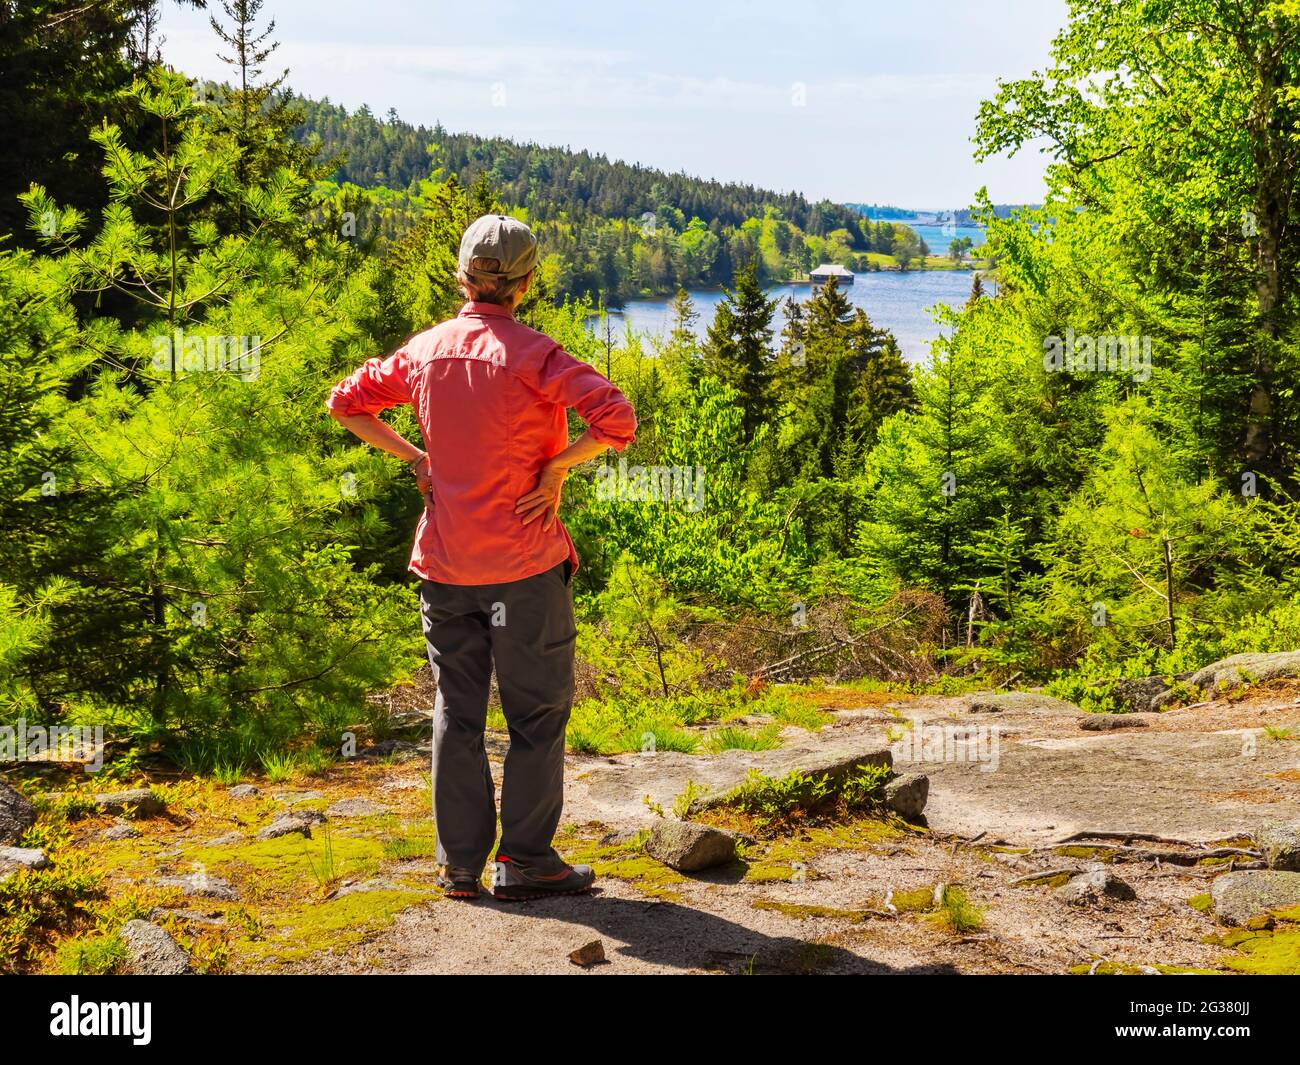 Little Long Pond, Little Long Pond Loop Carriage Road, Acadia National Park, Mount Desert Island, Maine, USA Stock Photo